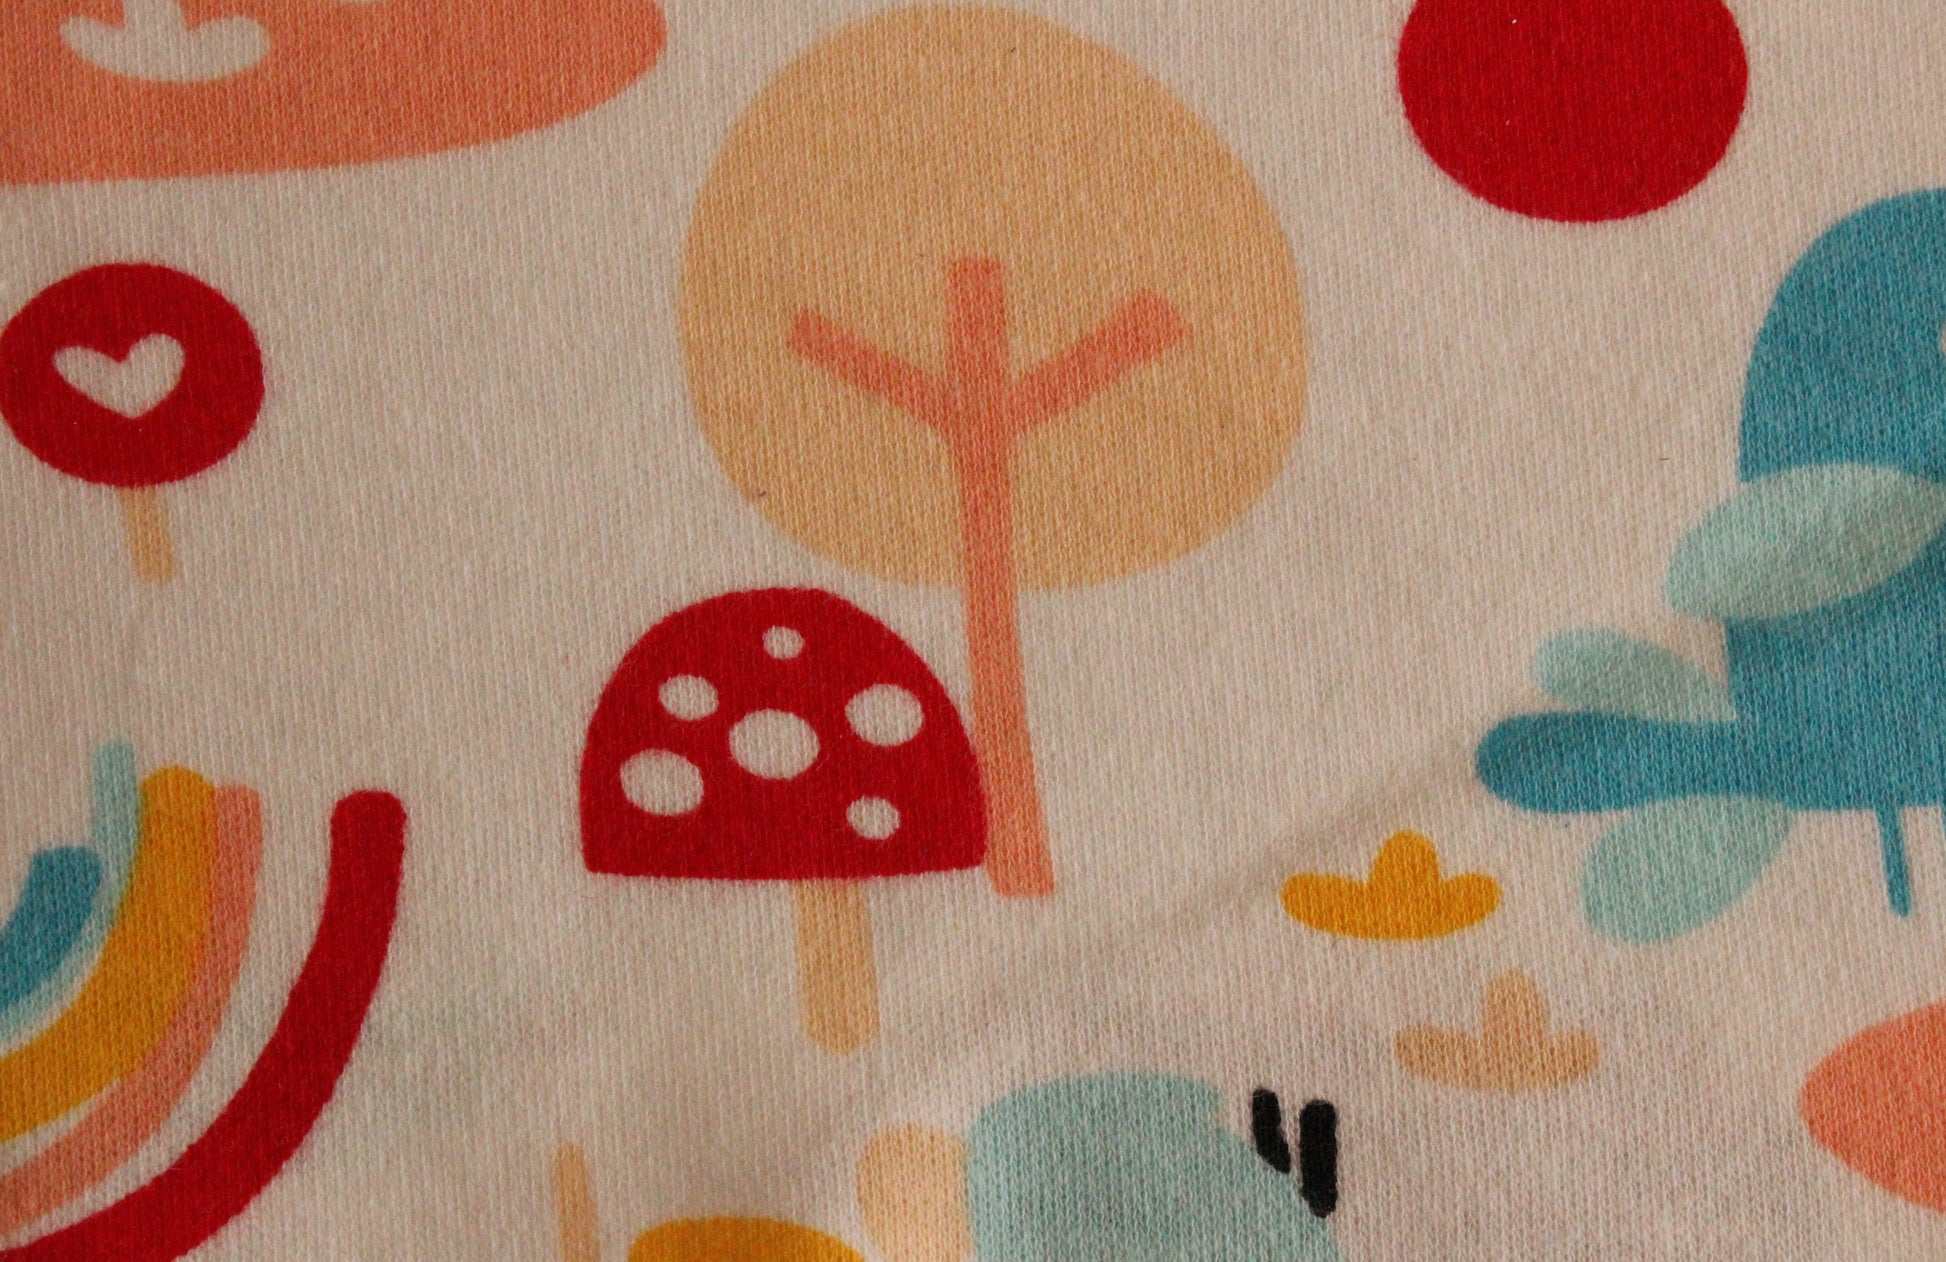 Birds, trees and rainbows - 2 way stretch 100% Cotton Jersey fabric - You’ve Got Me In Stitches